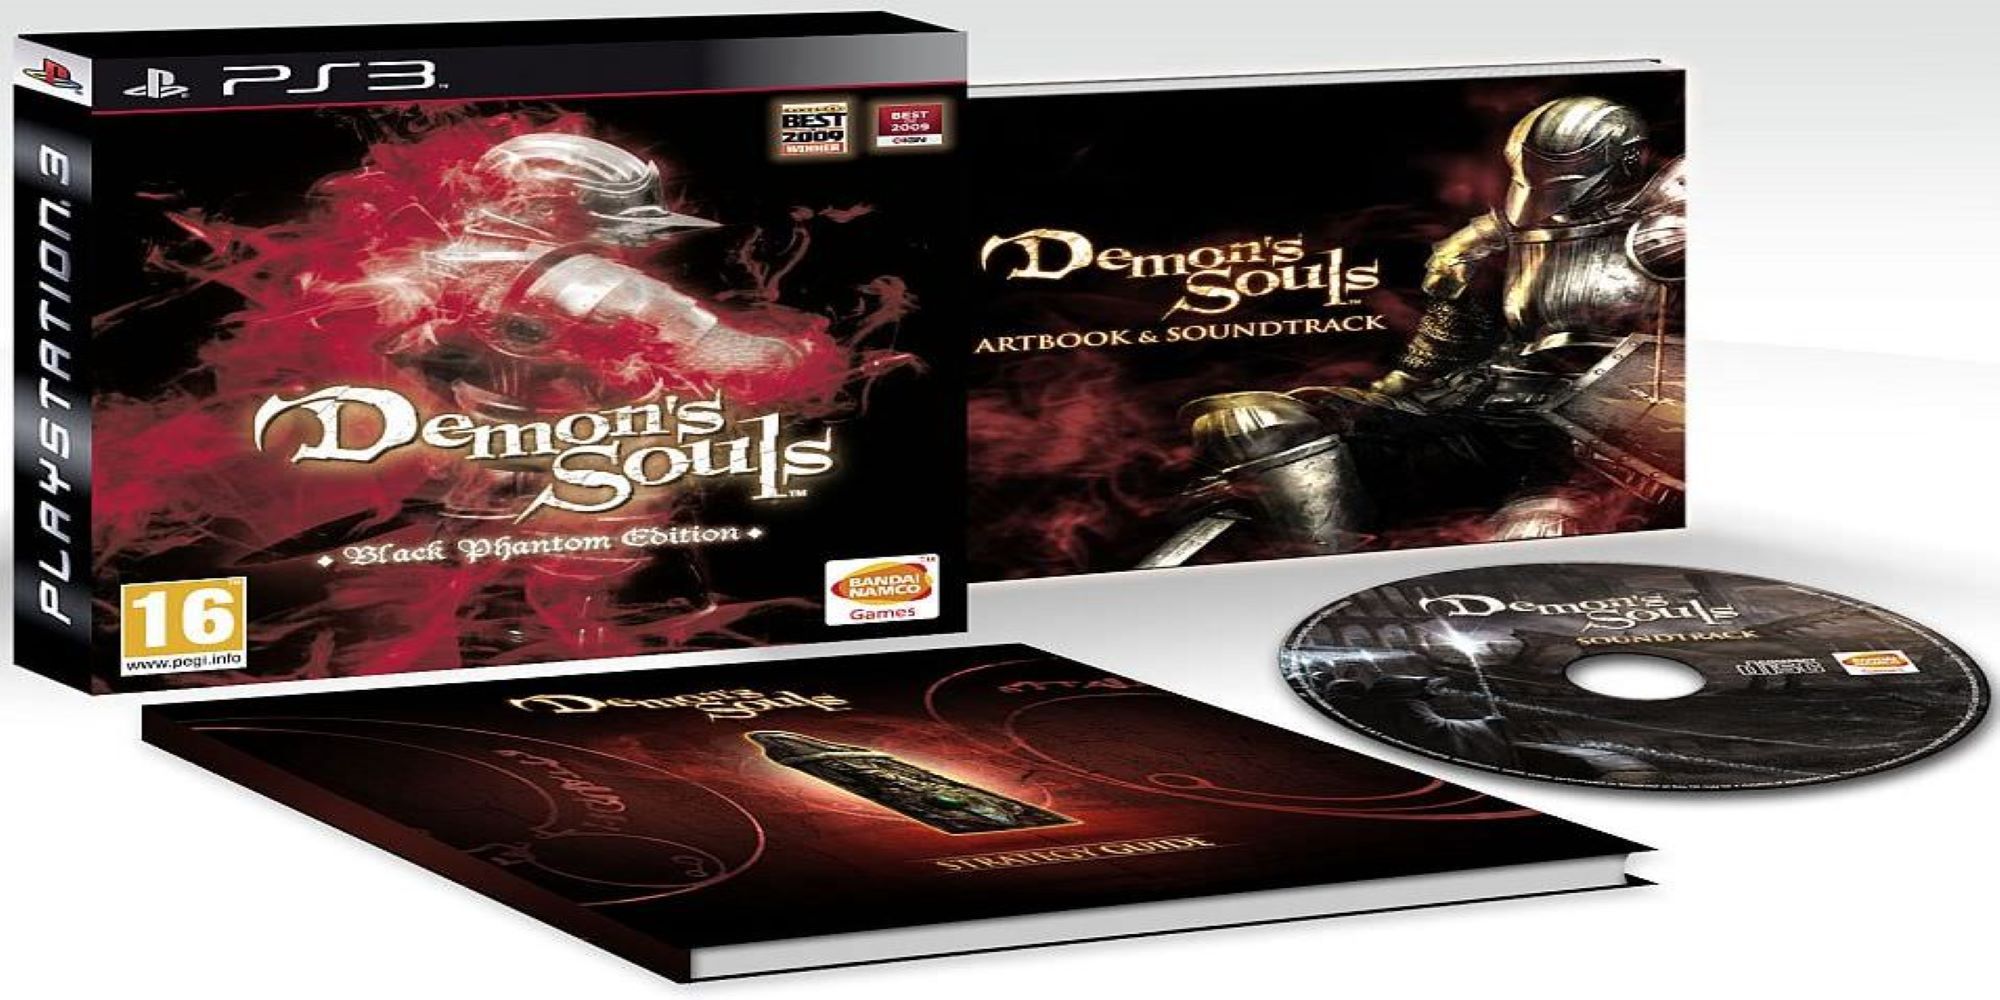 It looks like the Dark Souls Trilogy collection could finally be coming to  Europe